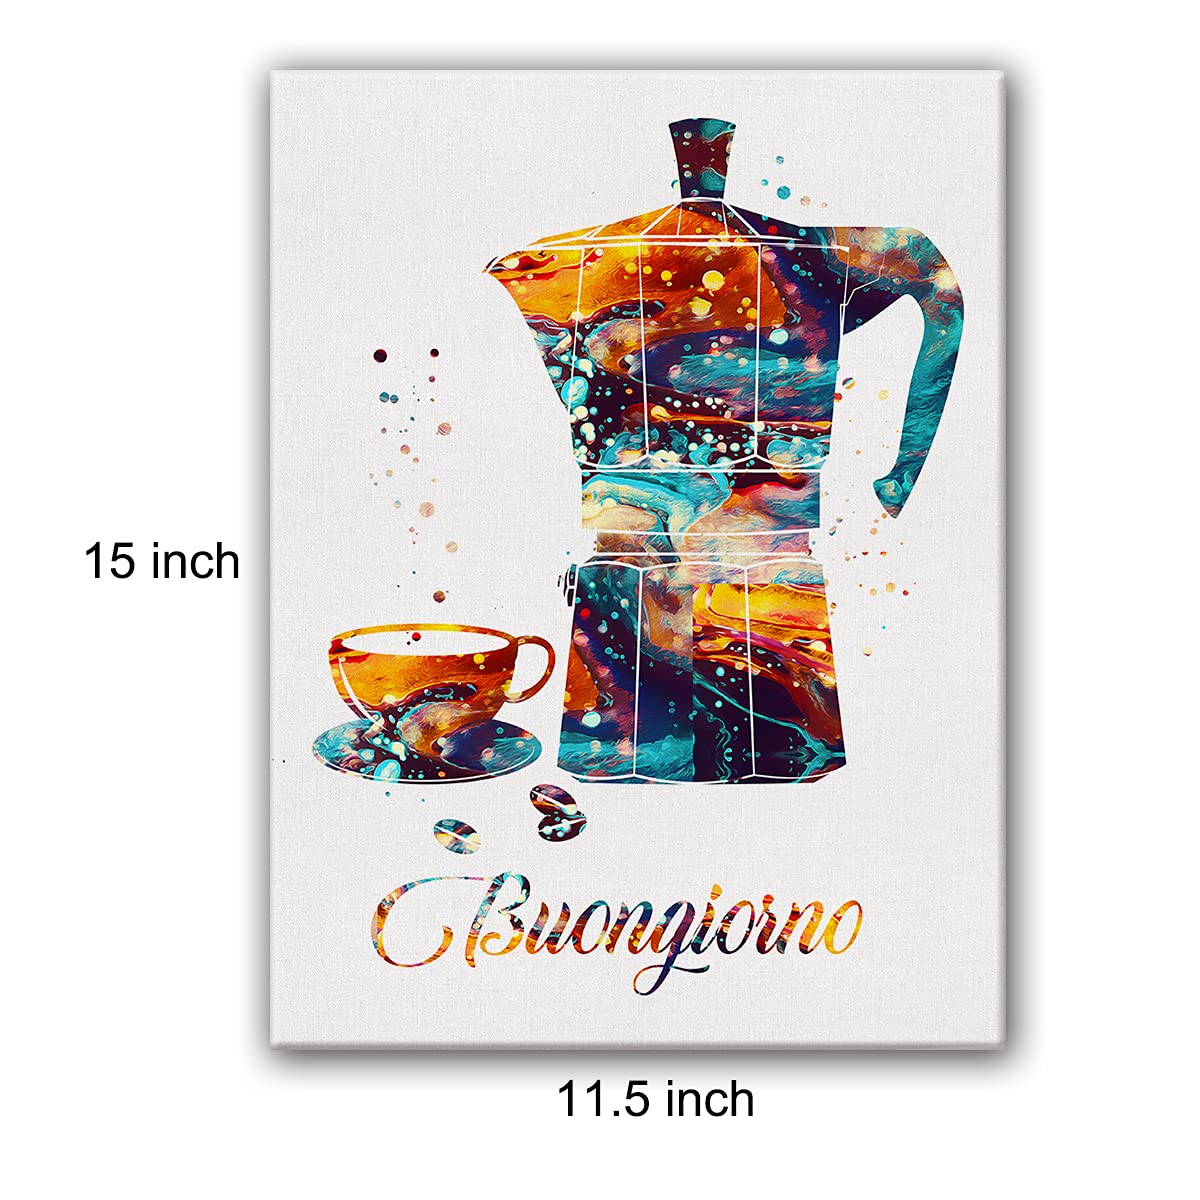 Buongiorno Moka Pot Coffee Watercolor Poster Canvas Wall Art for Home/Office/Kitchen Decor - Coffee Canvas Print Wall Art Painting Ready to Hang Gifts - Easel & Hanging Hook 12x15 Inch